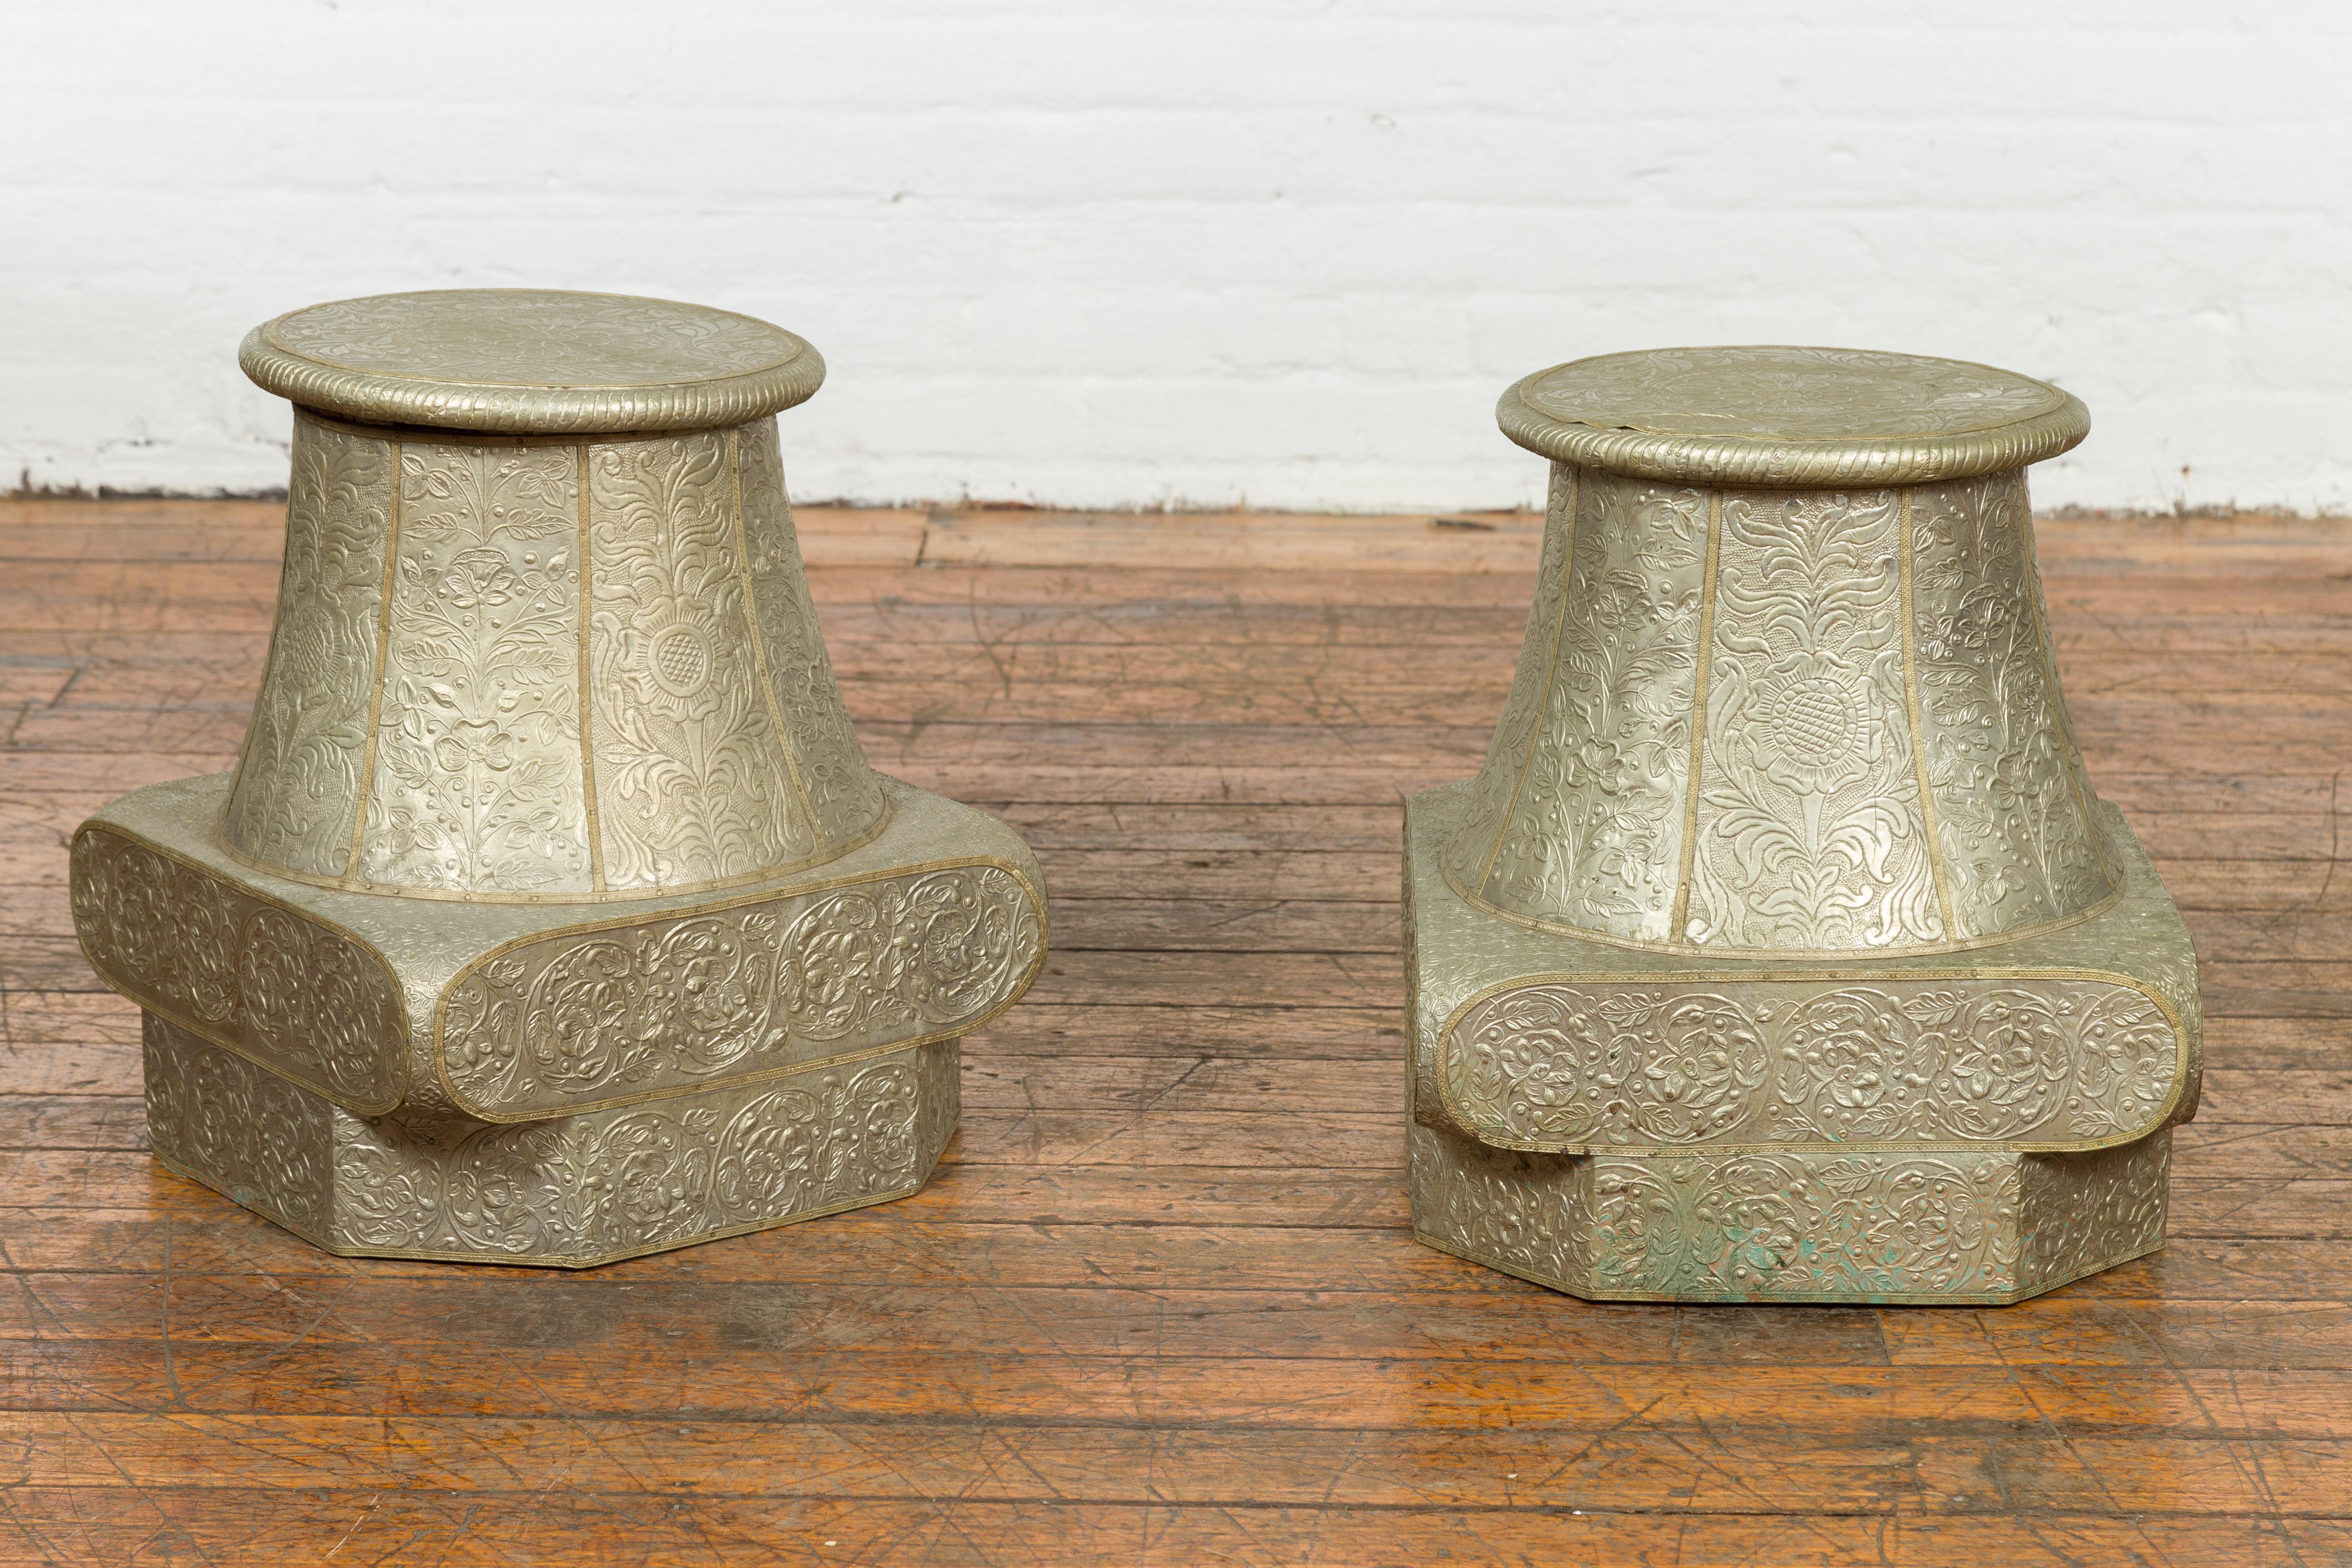 Two antique Indian brass over wood capital stands from the 19th century, with repoussé scrollwork décor. We are pricing and selling them each separately. Created in India during the 19th century, these pedestals showcase the shape of Classical